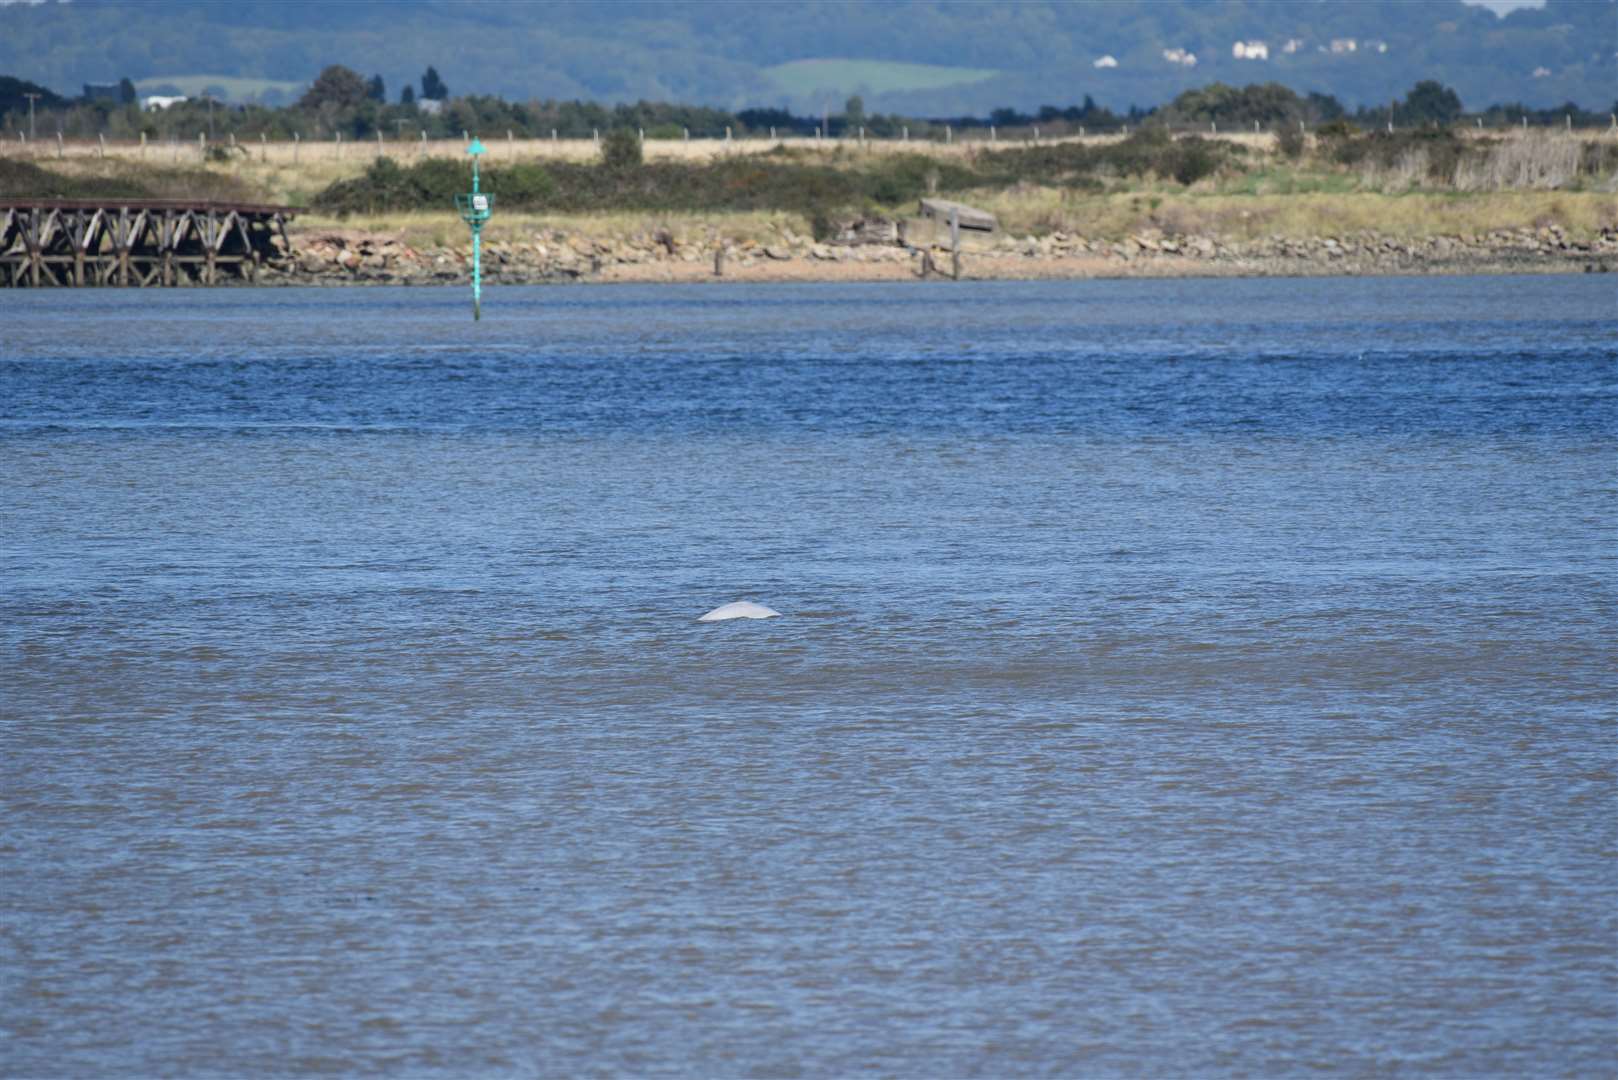 The Beluga poked it's head out of the water on multiple occasions. Picture: Fraser Gray